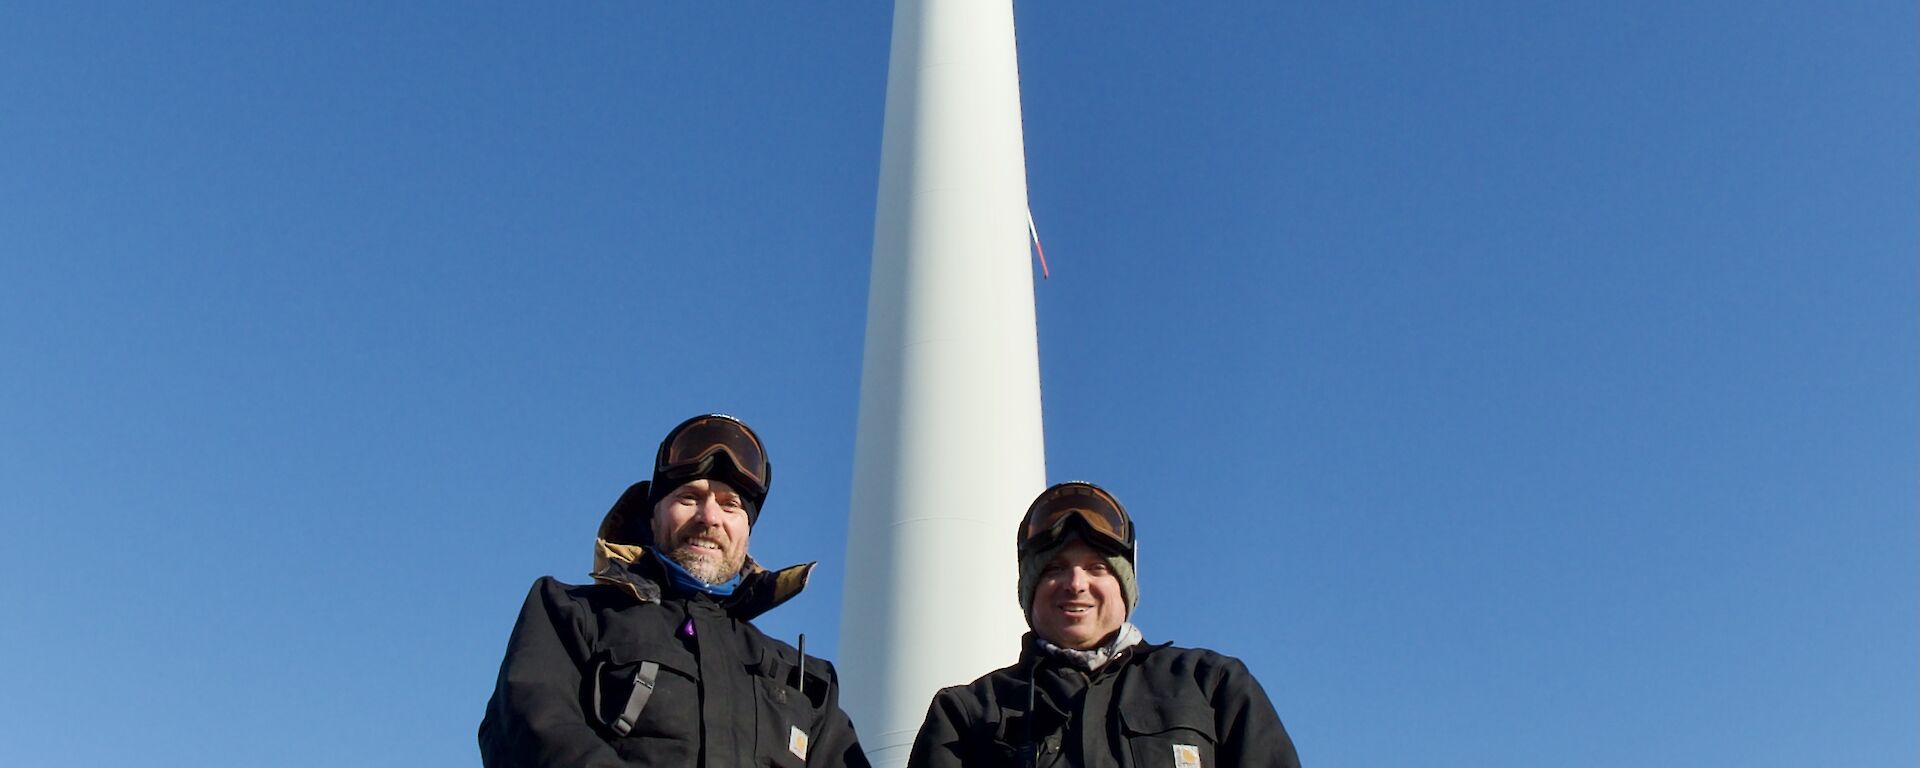 Two expeditioners standing for a photo with the wind turbine in the background.